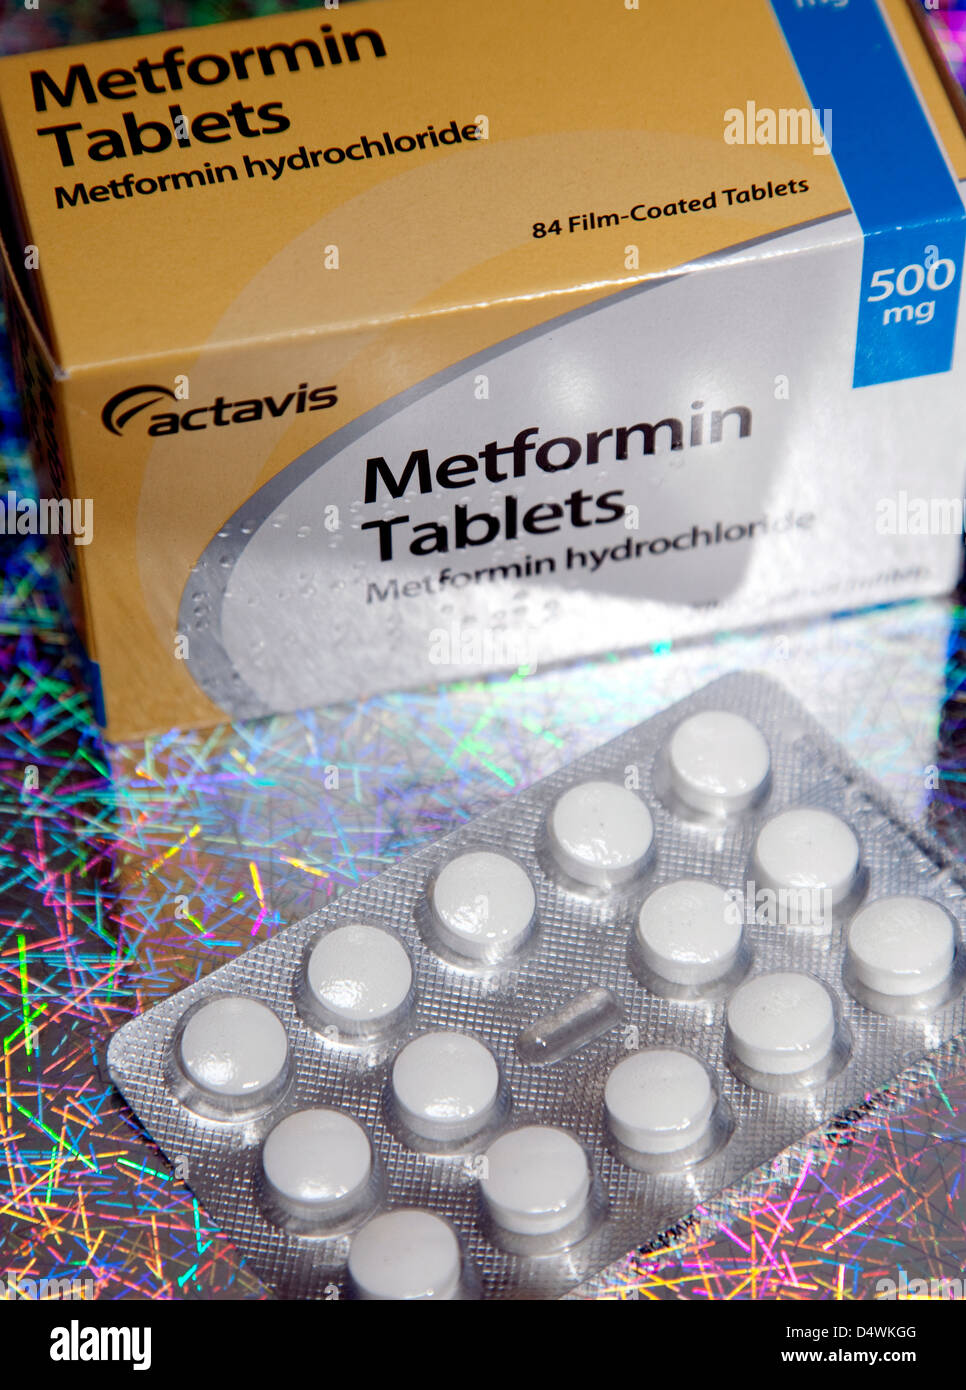 Metformin tablets for diabetes may also be effective as a cancer treatment, London Stock Photo